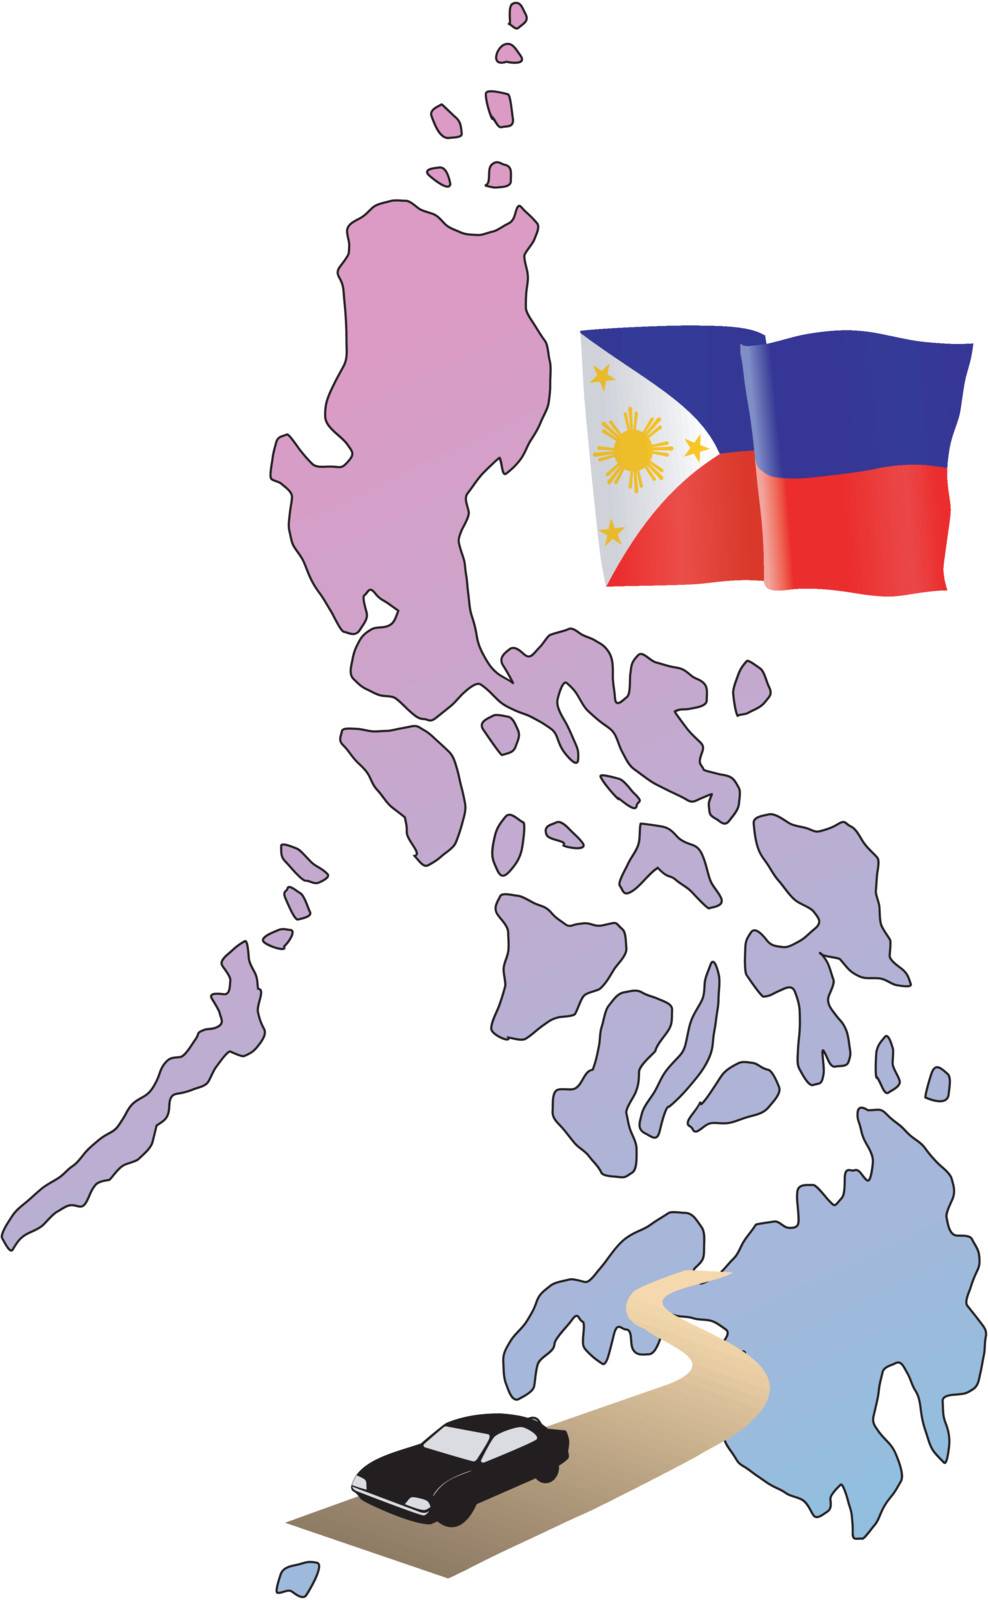 roads of Philippines by Perysty